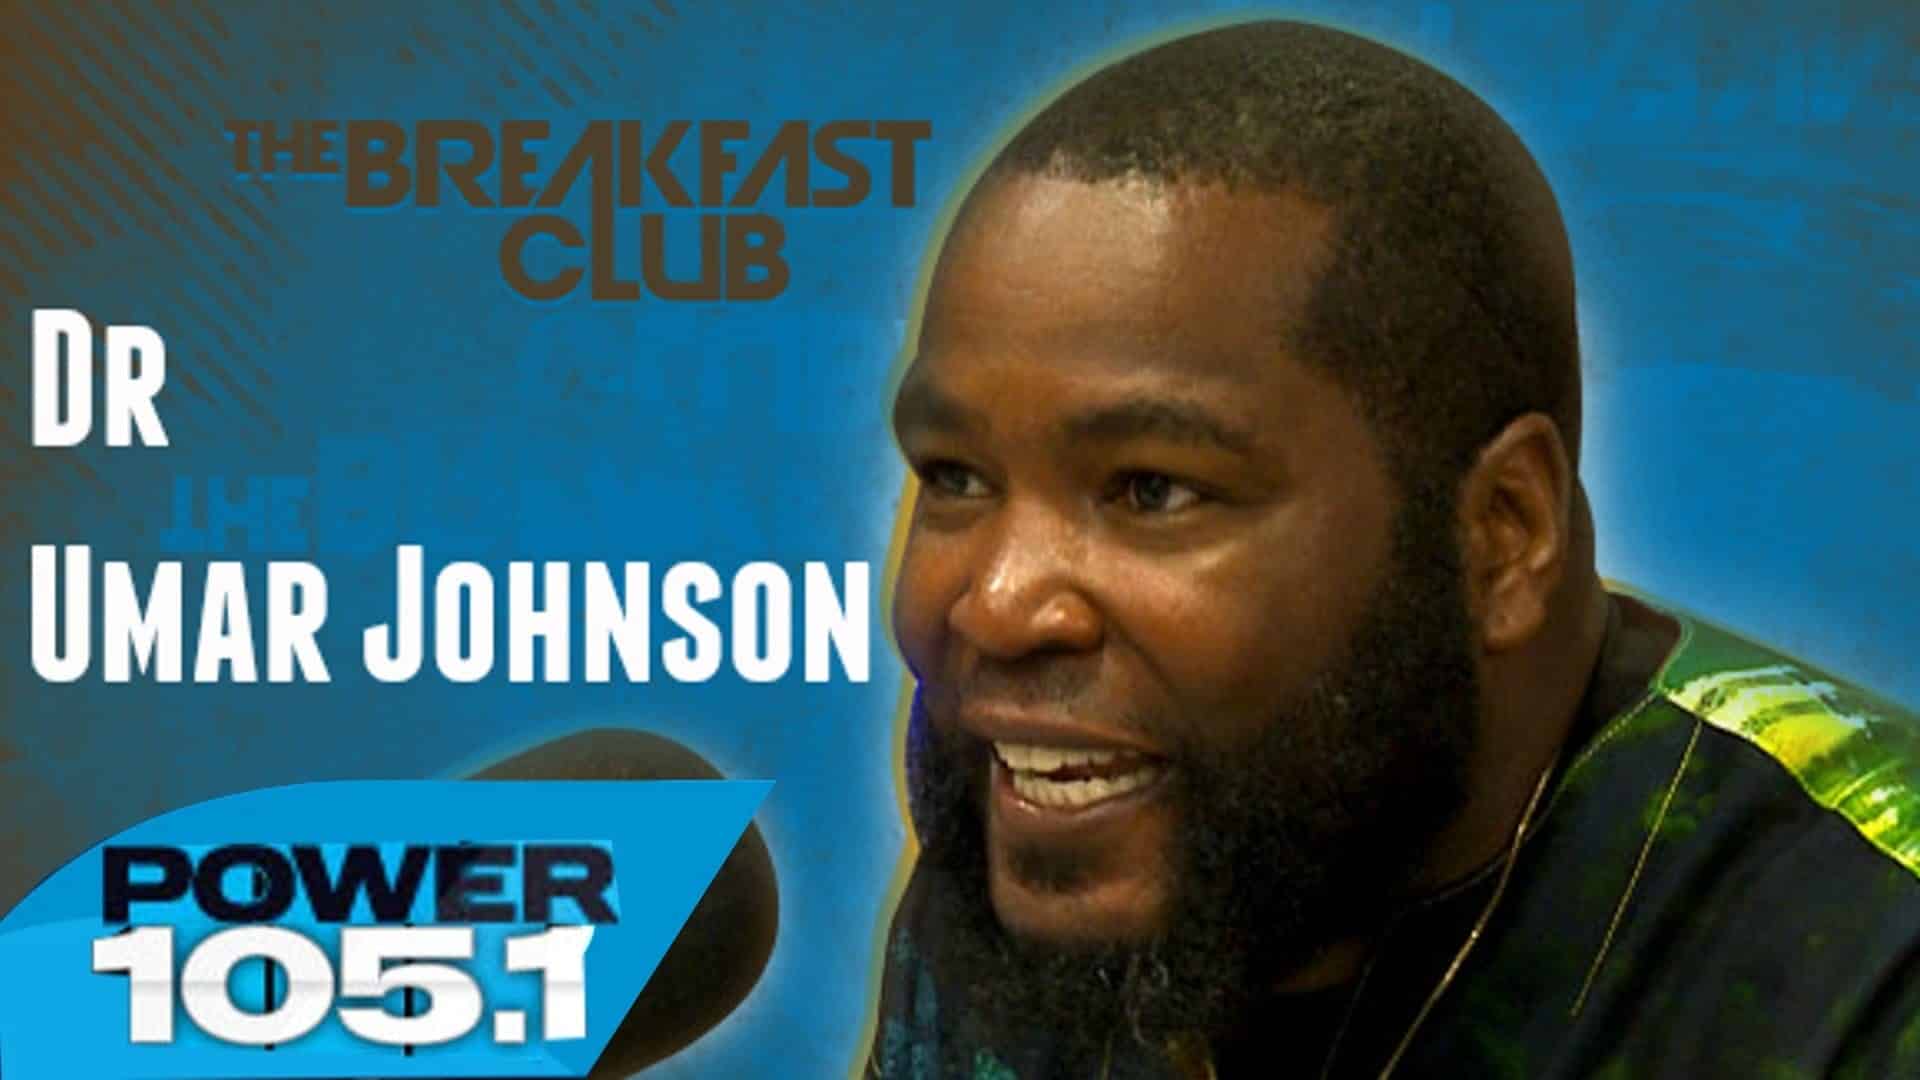 Dr. Umar Johnson Powerful & Controversial Interview With The Breakfast Club! 1